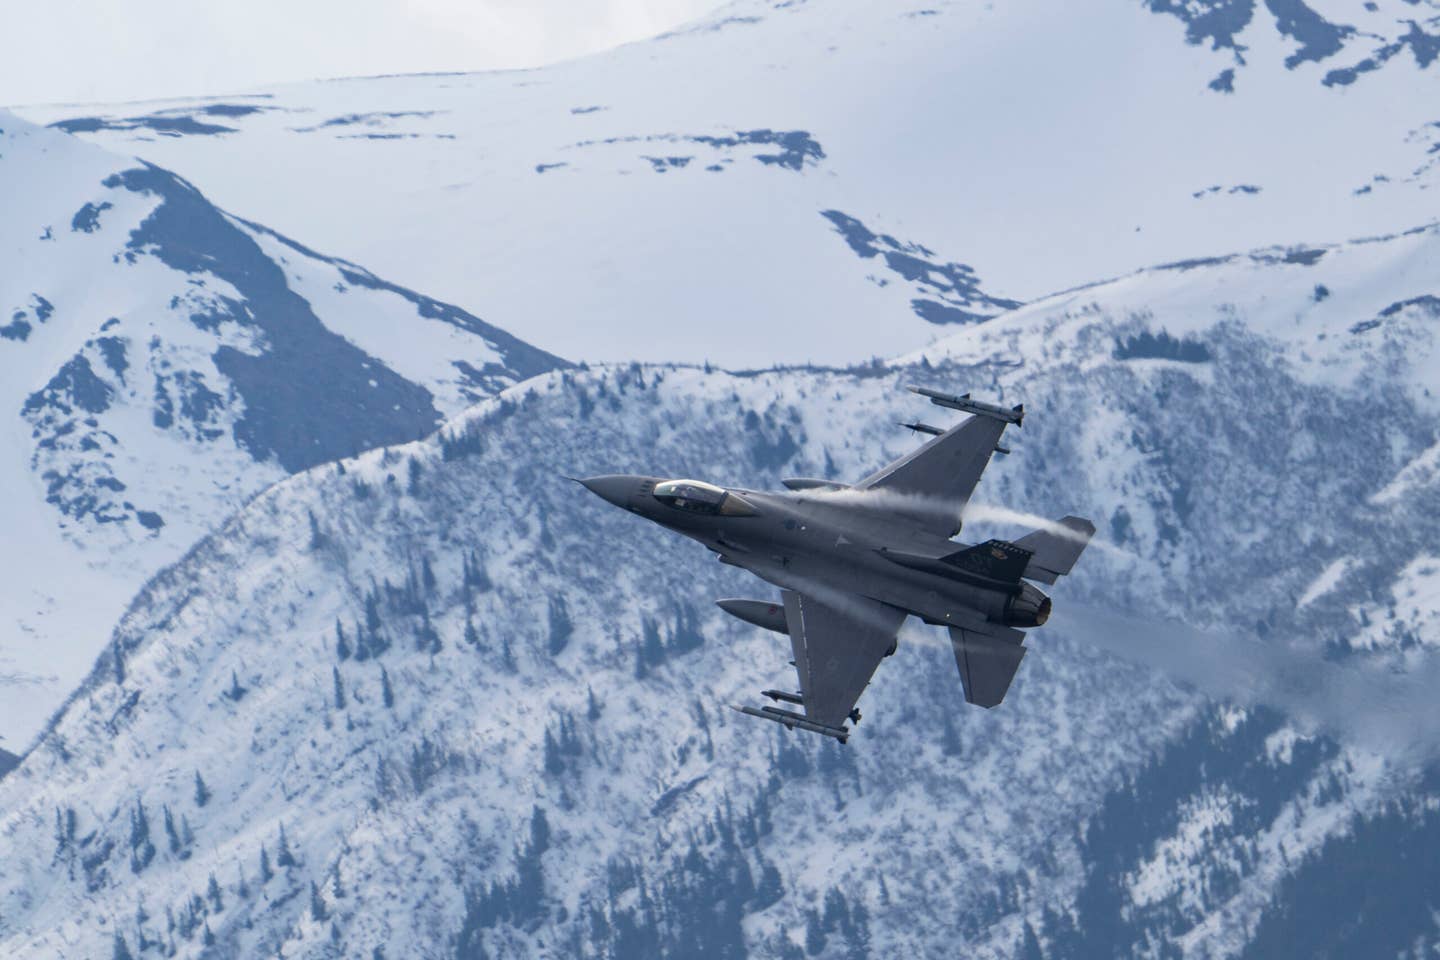 A U.S. Air Force F-16 Fighting Falcon assigned to the 85th Test and Evaluation Squadron, takes off from the flightline during Northern Edge 23-1 at Joint Base Elmendorf-Richardson, Alaska, May 8, 2023. Northern Edge 23-1 provides an opportunity for joint, multinational and multi-domain operations designed to implement high-end, realistic war fighter training, develop and improve joint interoperability, and enhance the combat readiness of participating forces. (U.S. Air Force photo by Airman 1st Class Shelimar Rivera Rosado)